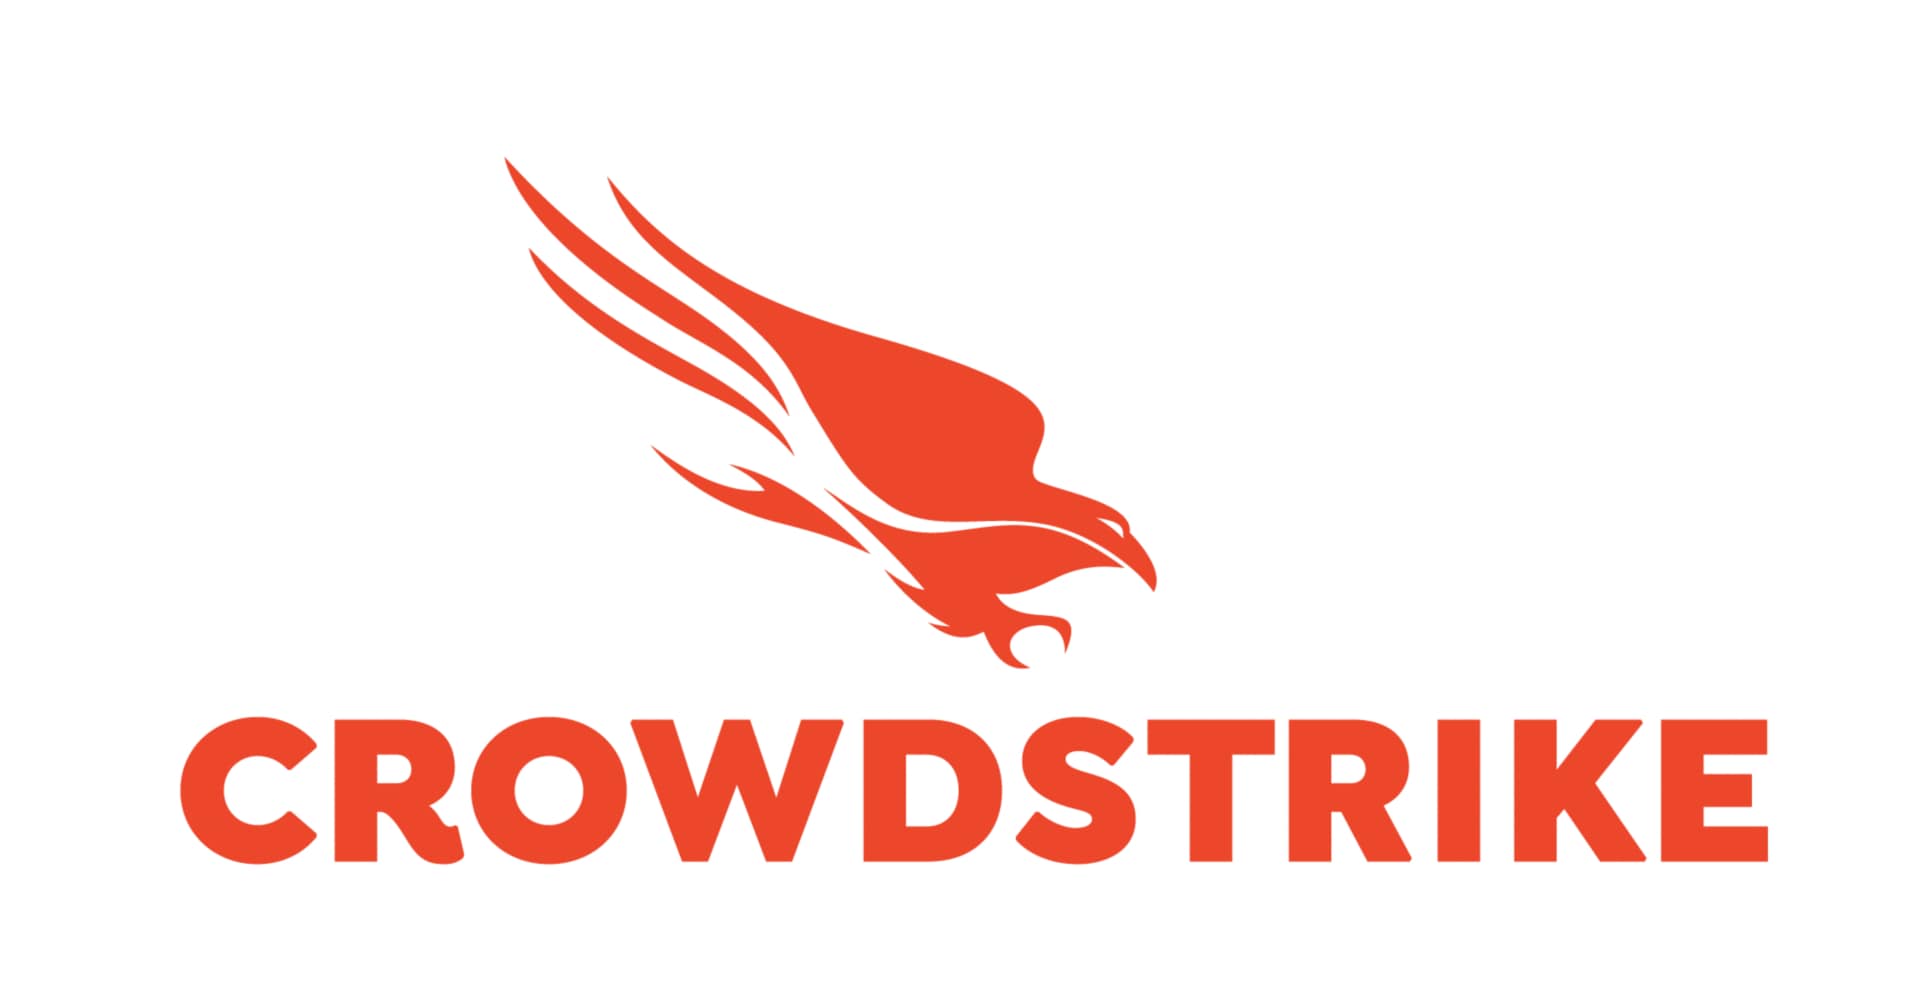 CrowdStrike 10-Month Falcon for Mobile Standard Software  (1-149 Licenses)